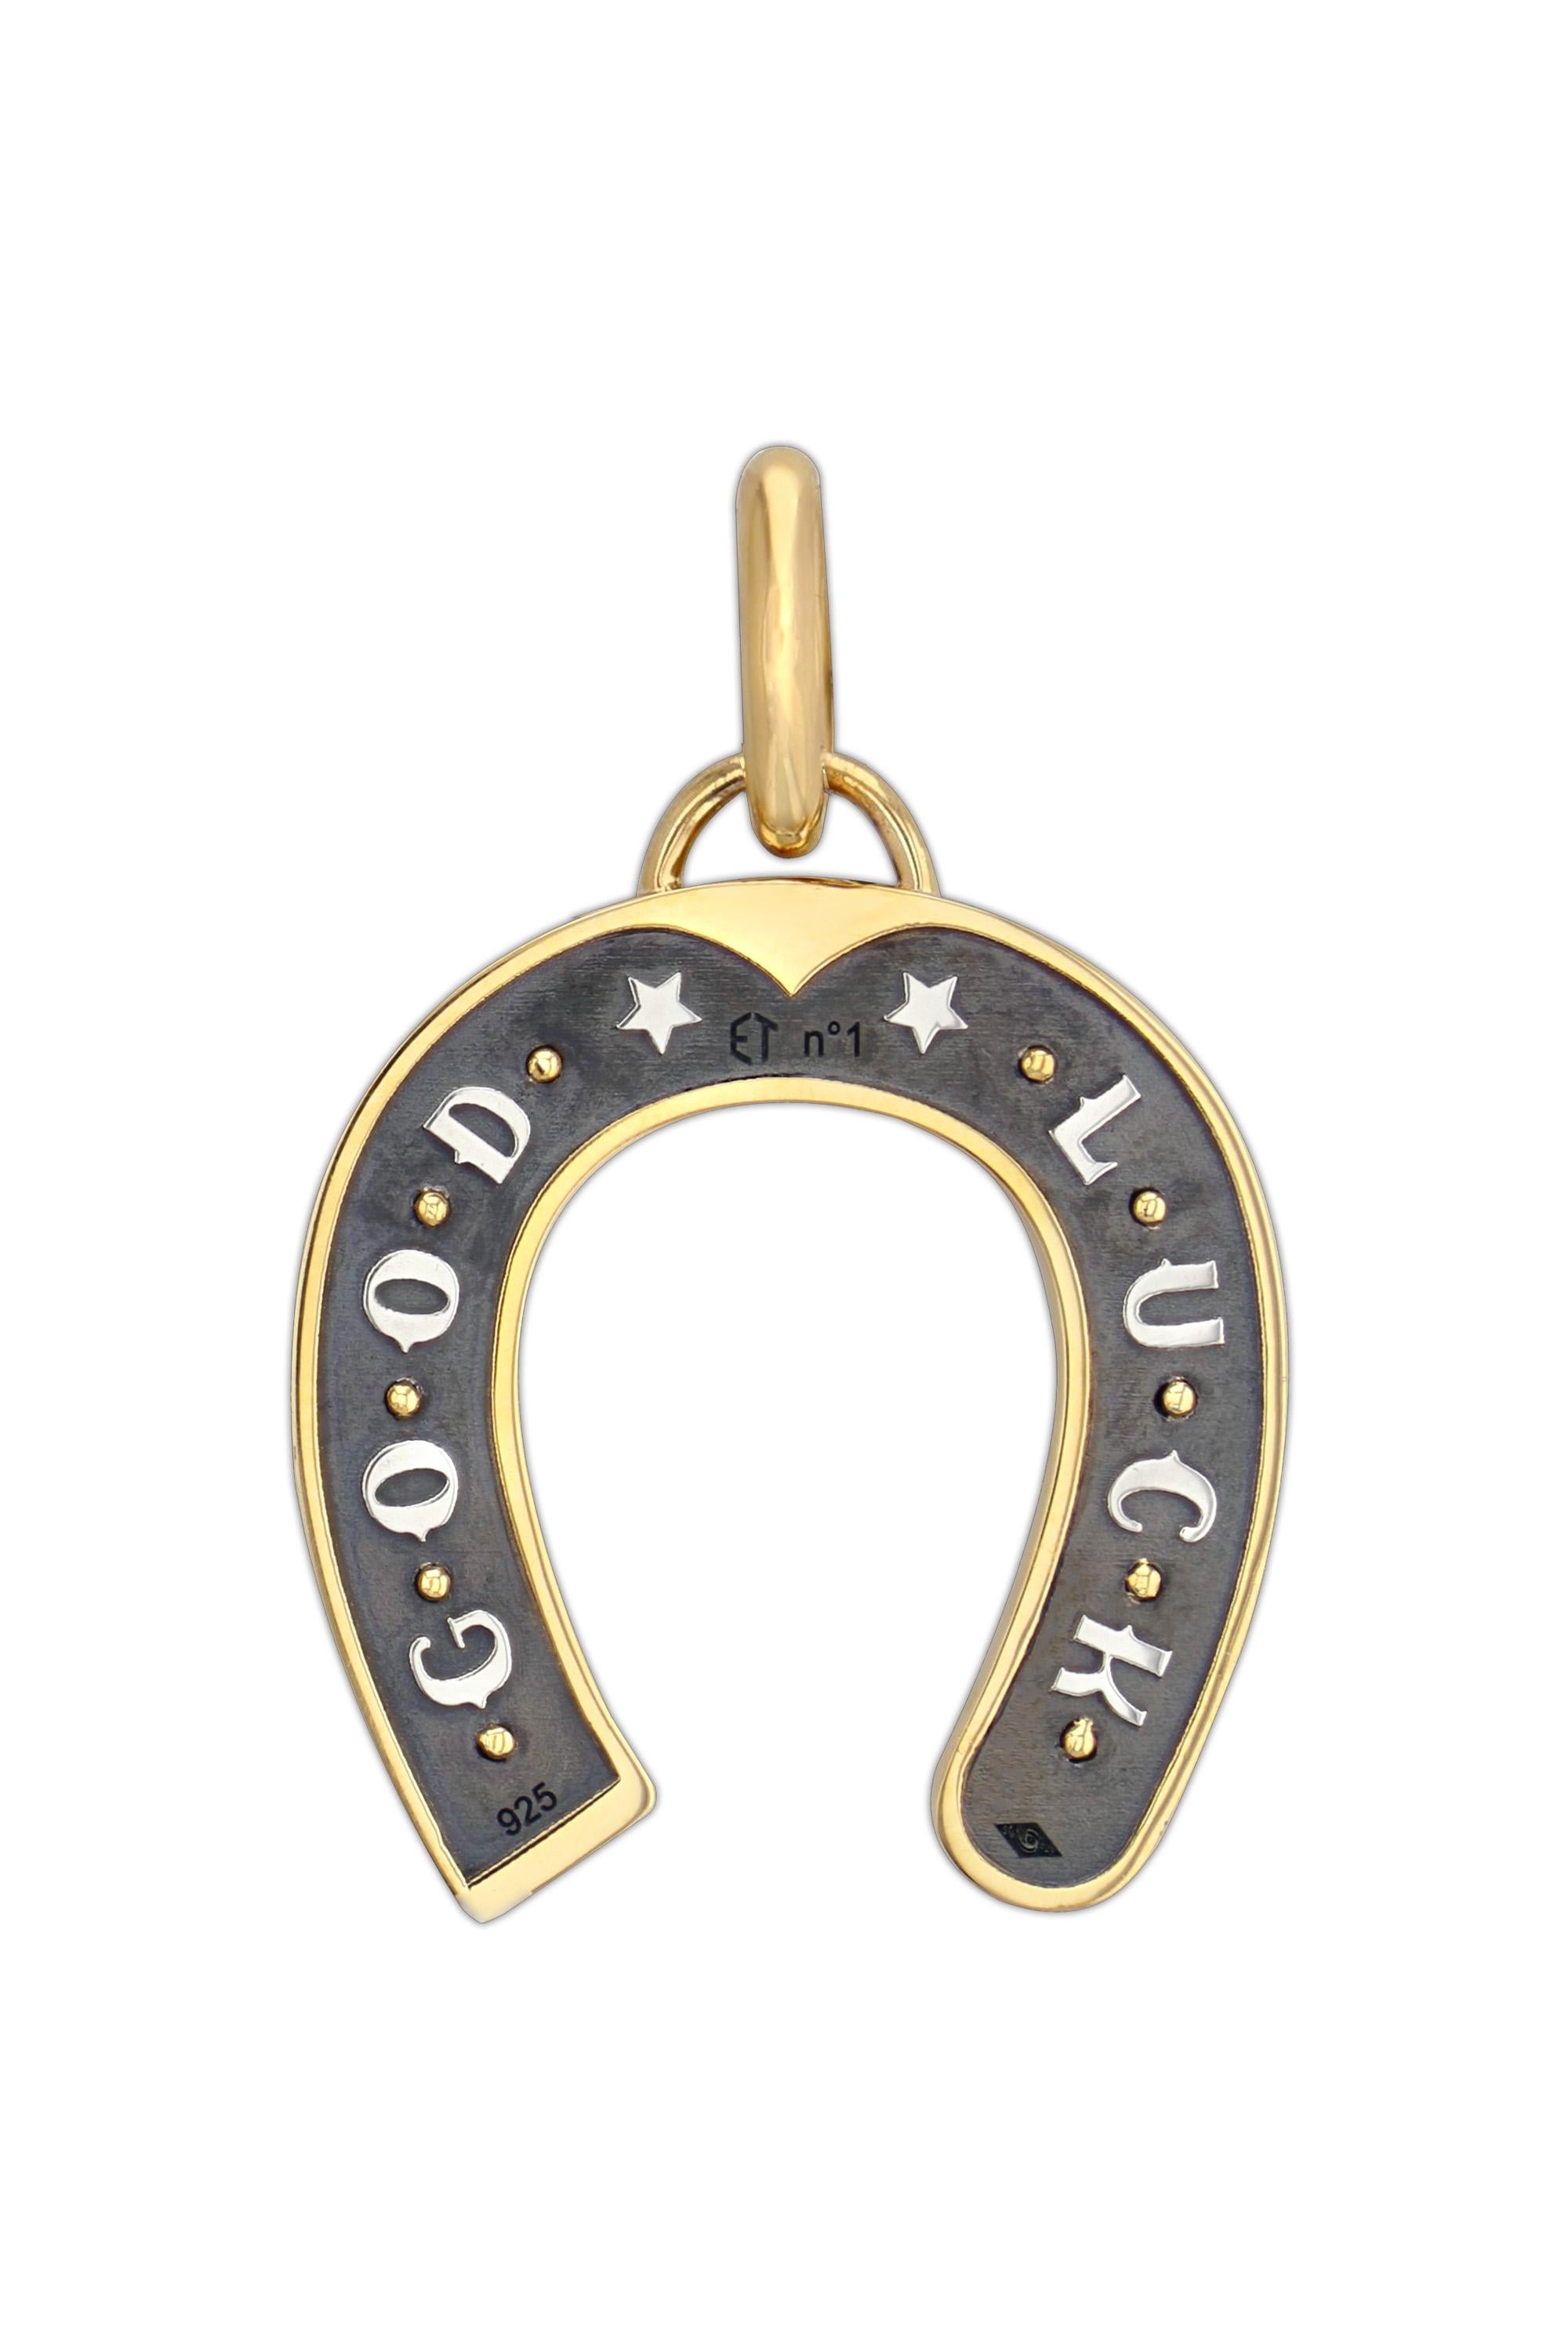 Yellow gold and distressed silver charm studded with diamonds. Openable gold bail.

Sold without the chain. 

Available with chain on request.

Details:
Diamonds : 0.4 cts          
18k Yellow Gold : 7.3 g     
Distressed Silver : 3.2 g        
Made